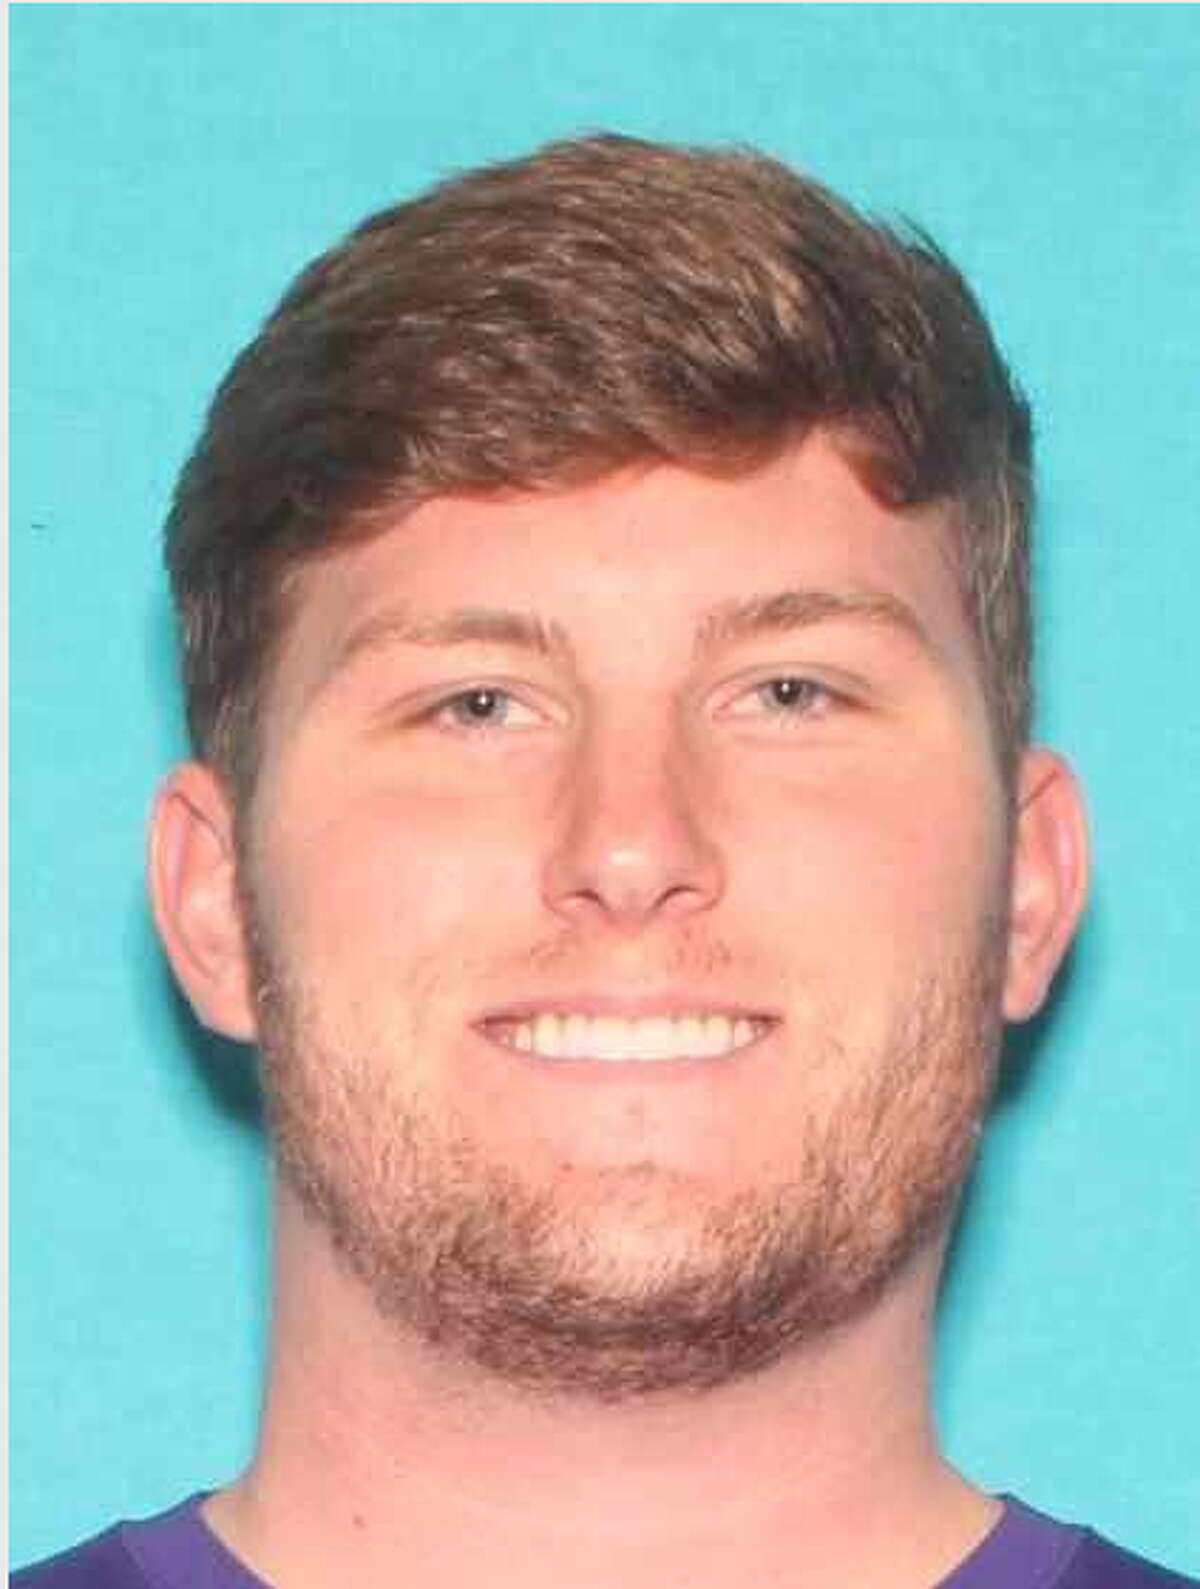 Ian Madden, 27, is accused of having a sexual relationship with a 17-year-old student, San Marcos police say.